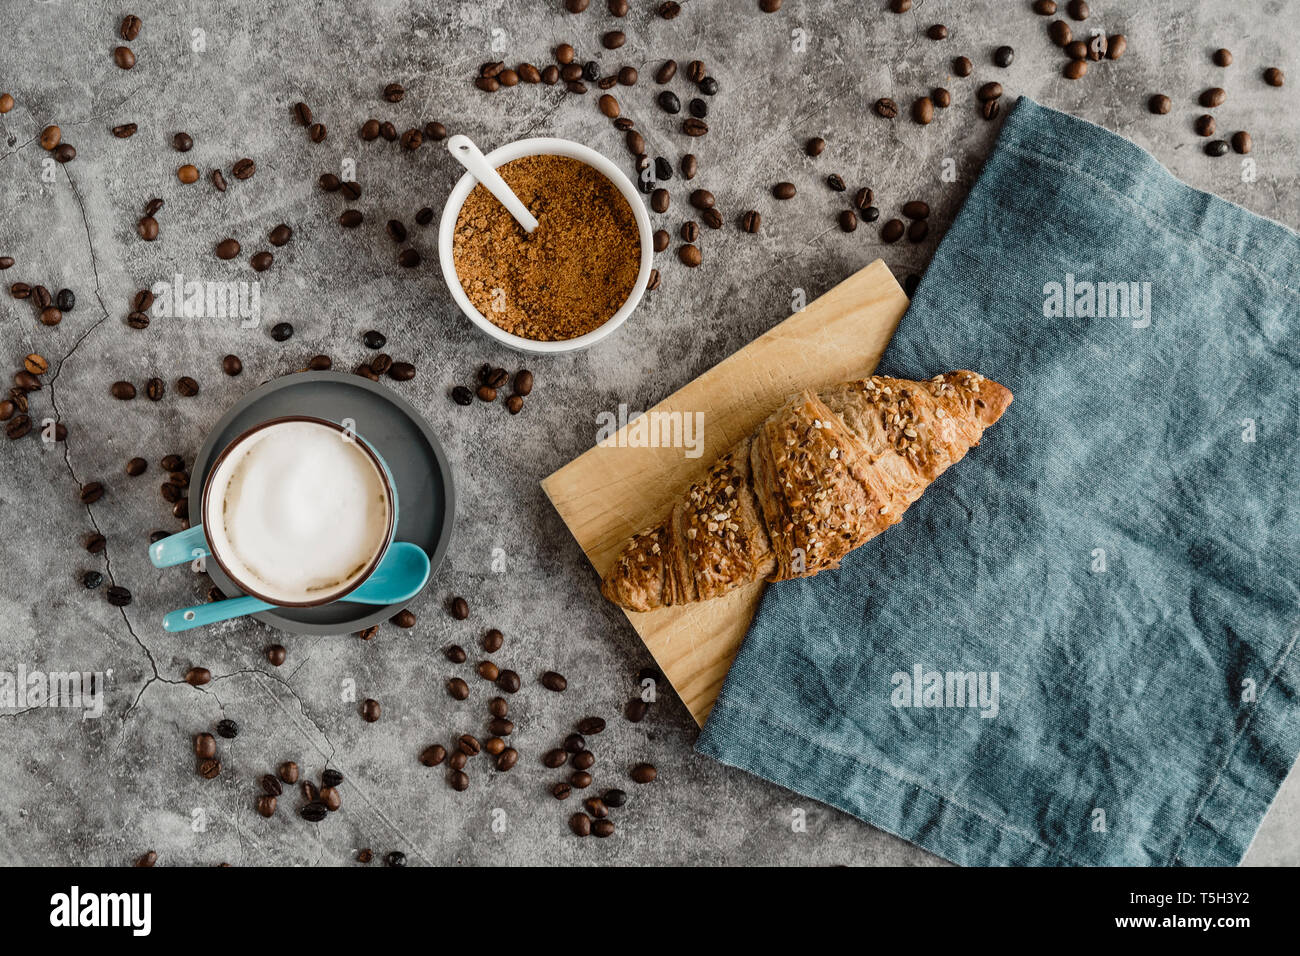 Cup of white coffee and a whole meal croissant Stock Photo